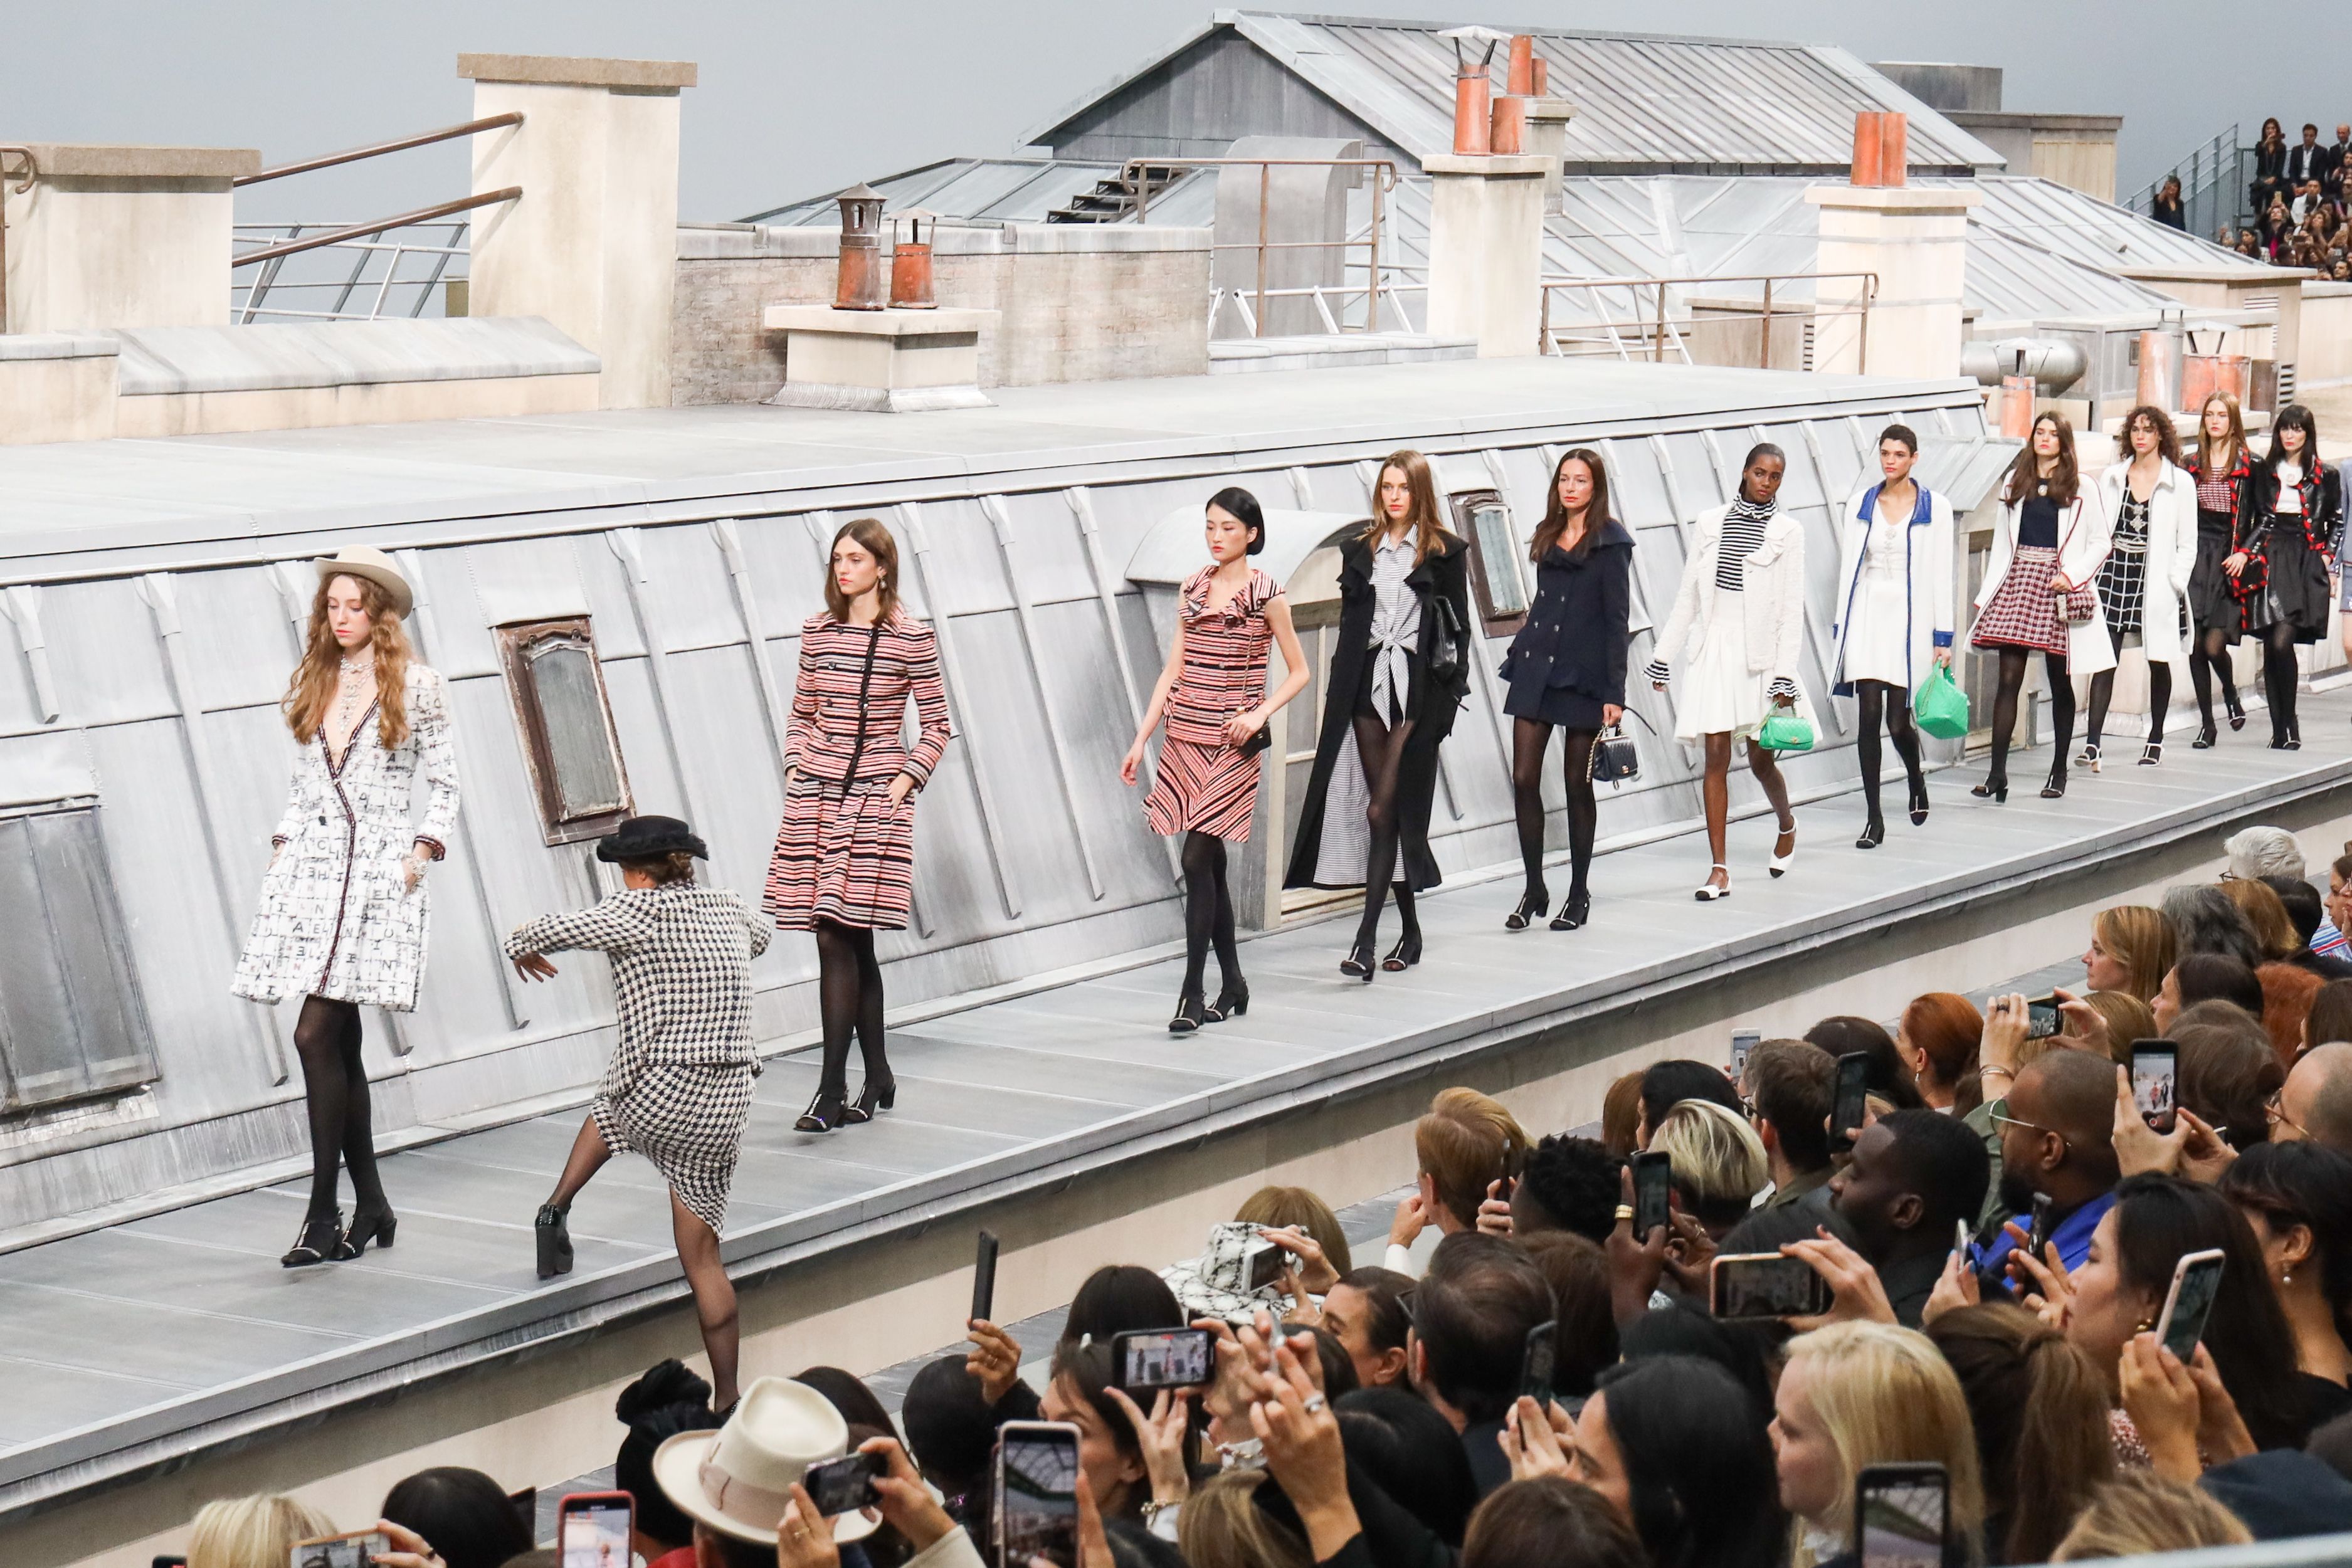 Gigi Hadid Just Saved the Chanel Runway Show After a Stranger Jumped on the  Catwalk